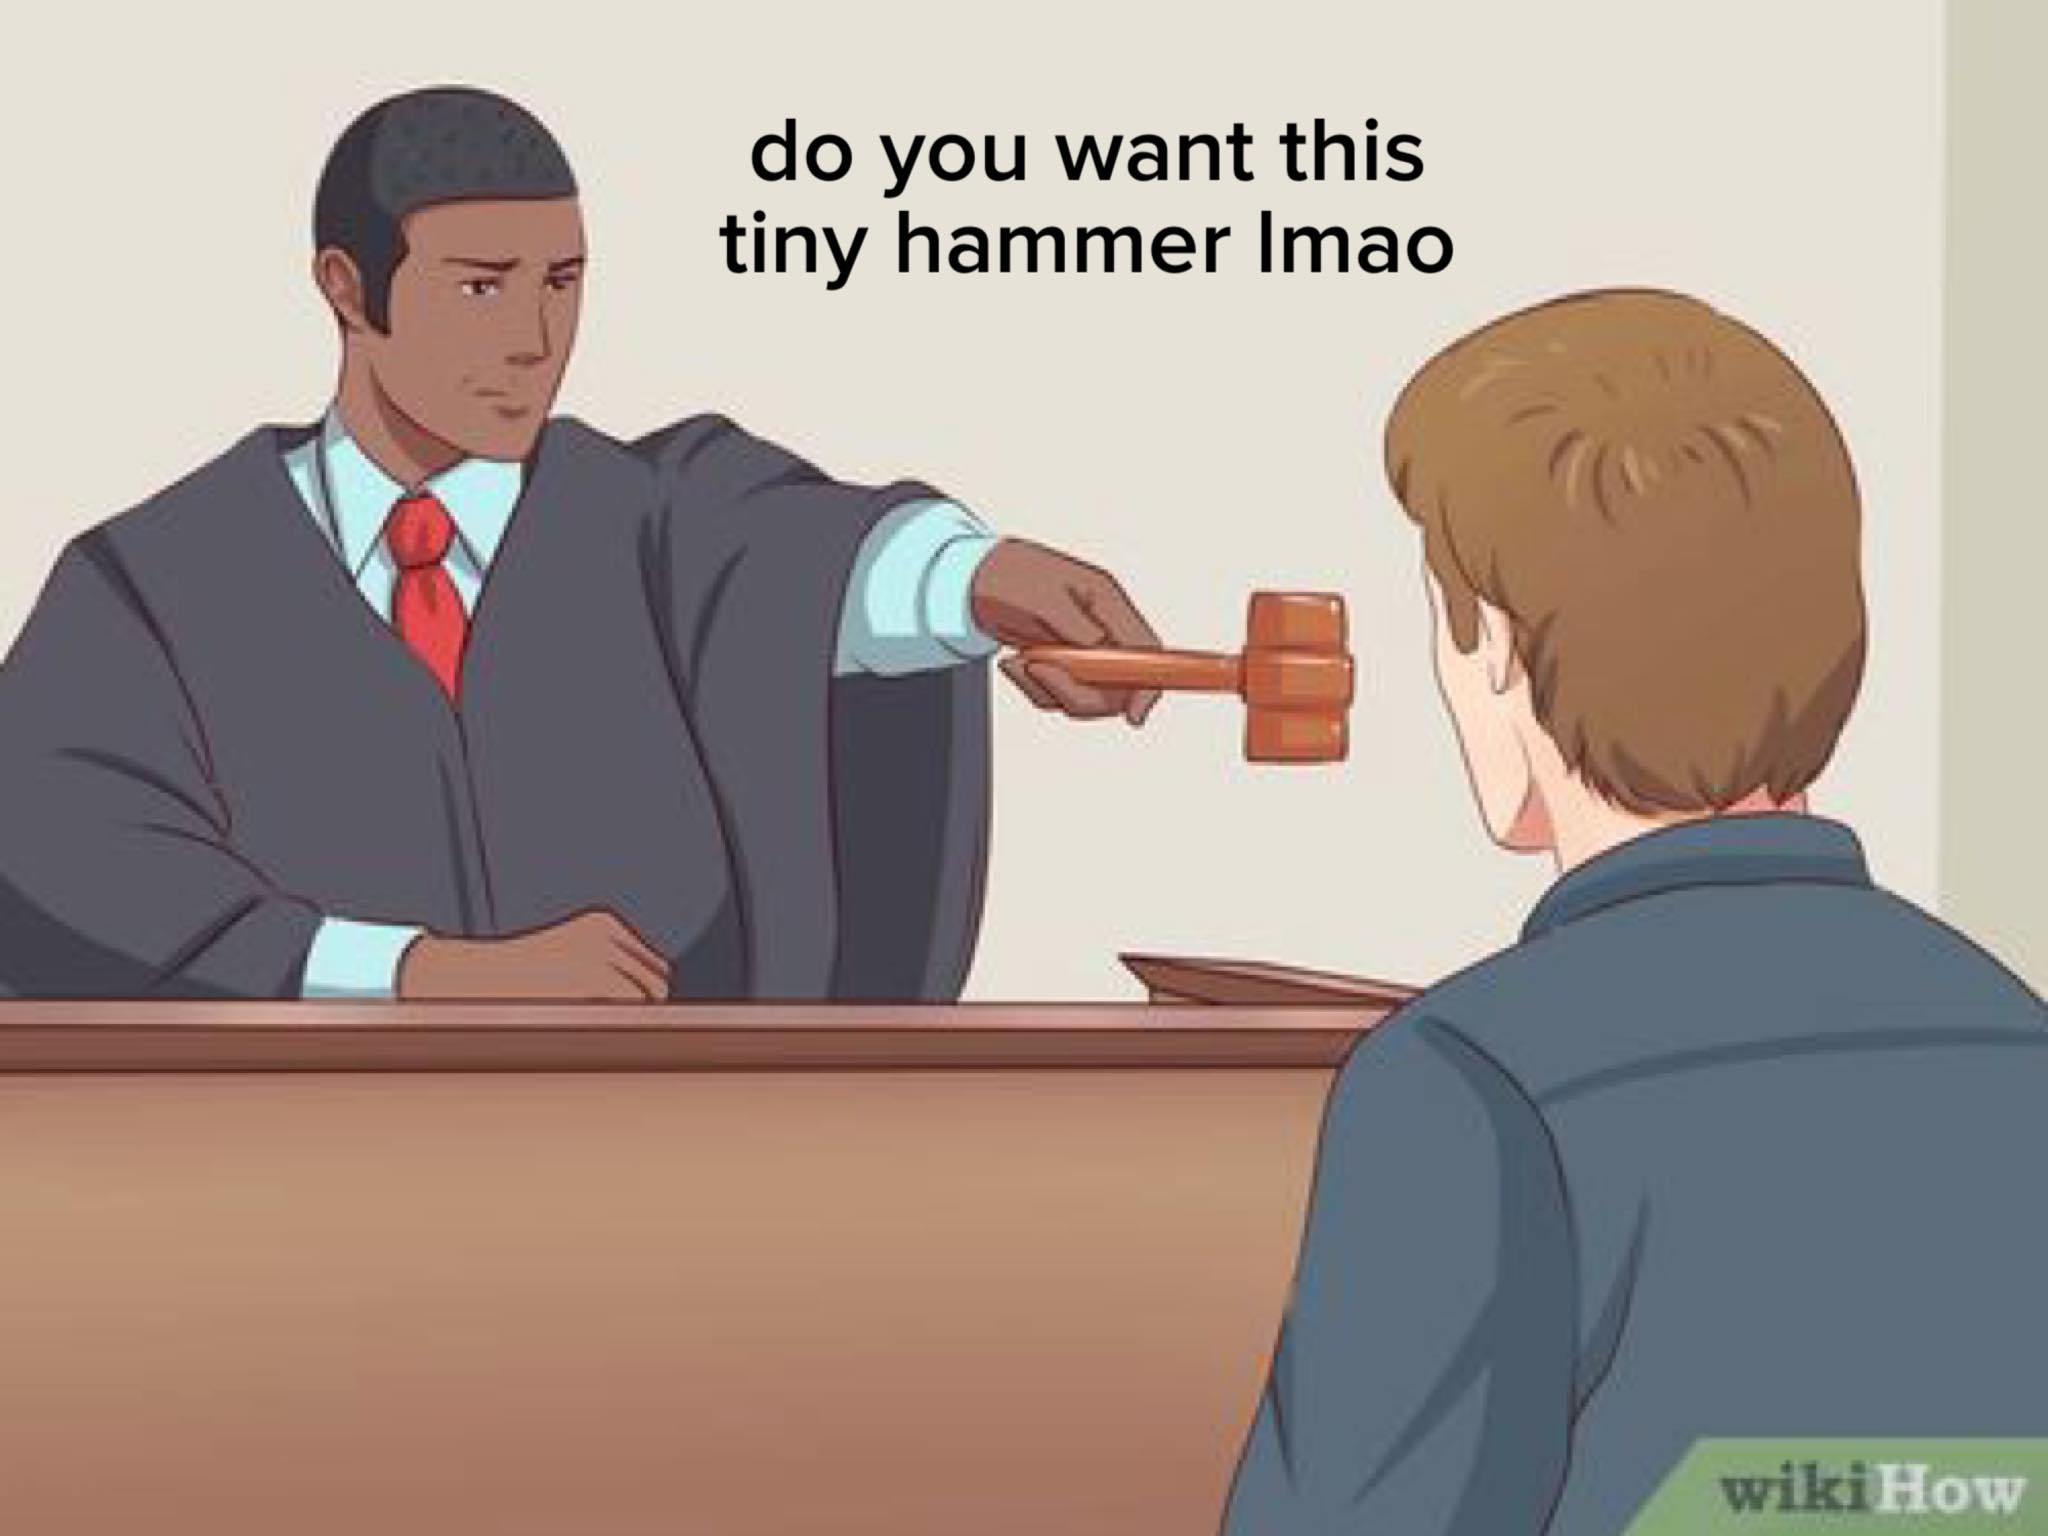 do you want this tiny hammer lmao - do you want this tiny hammer Imao wikiHow